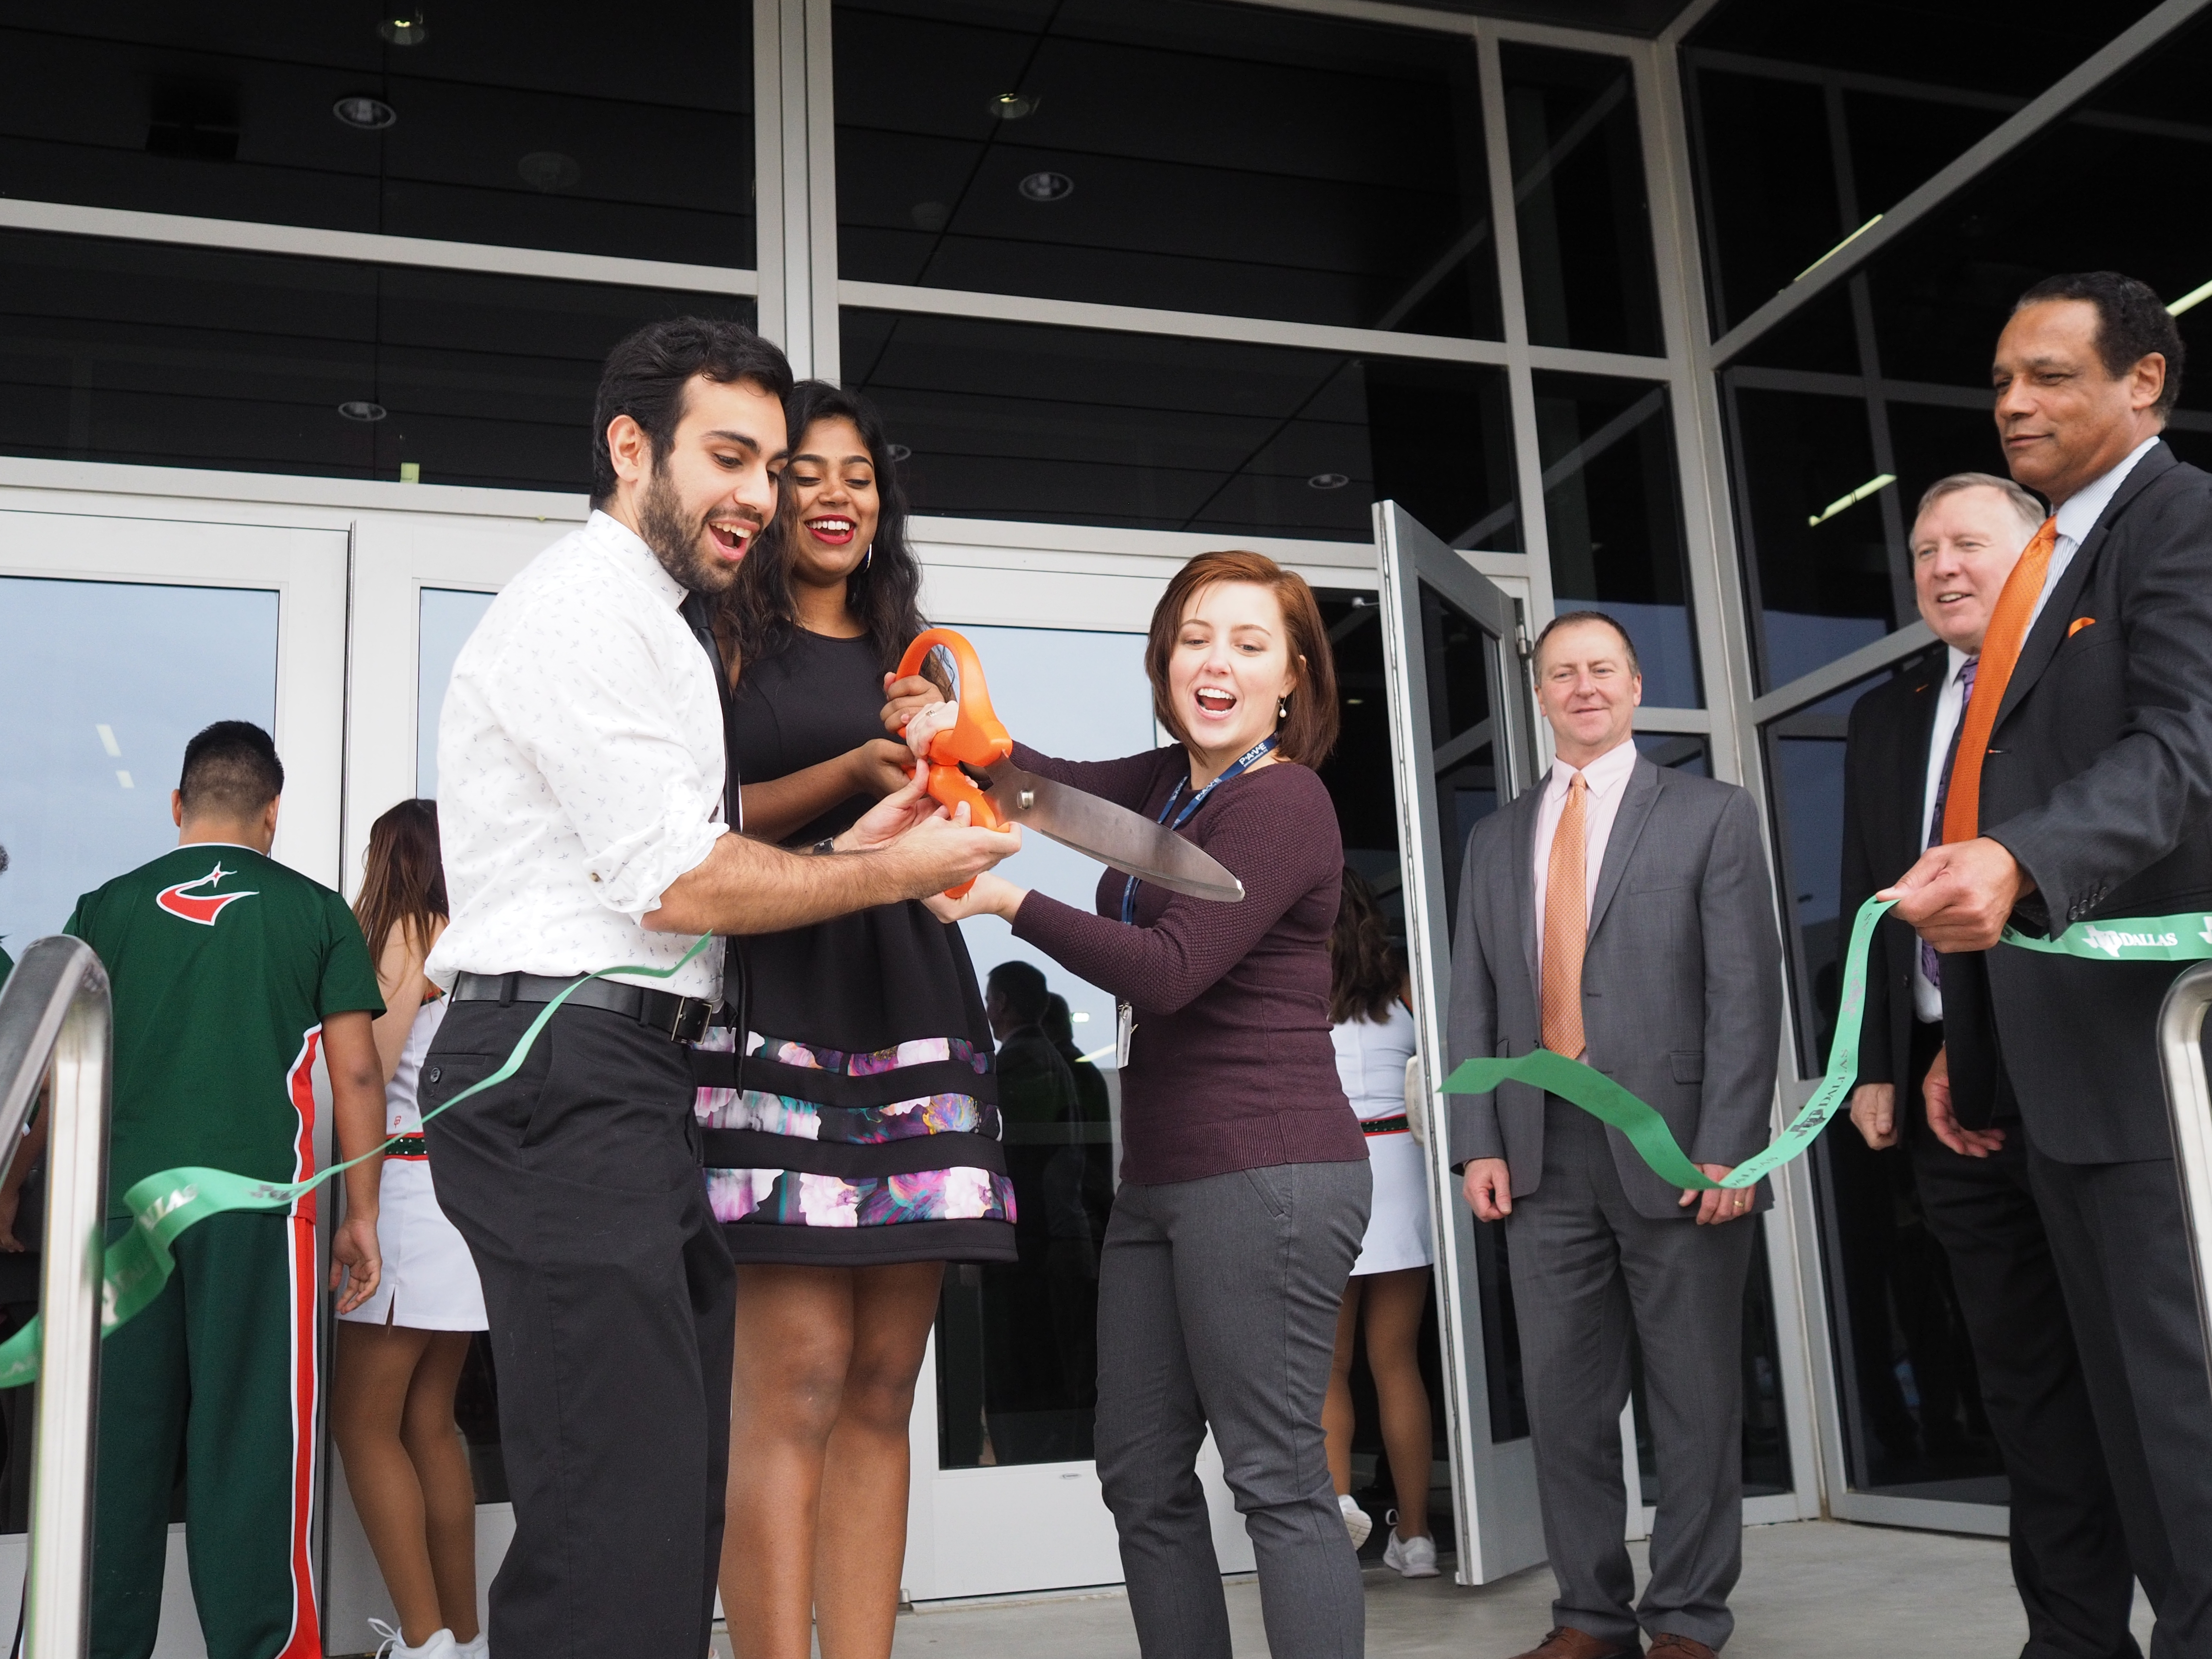 Campus hosts ribbon cutting ceremony for new SSA building